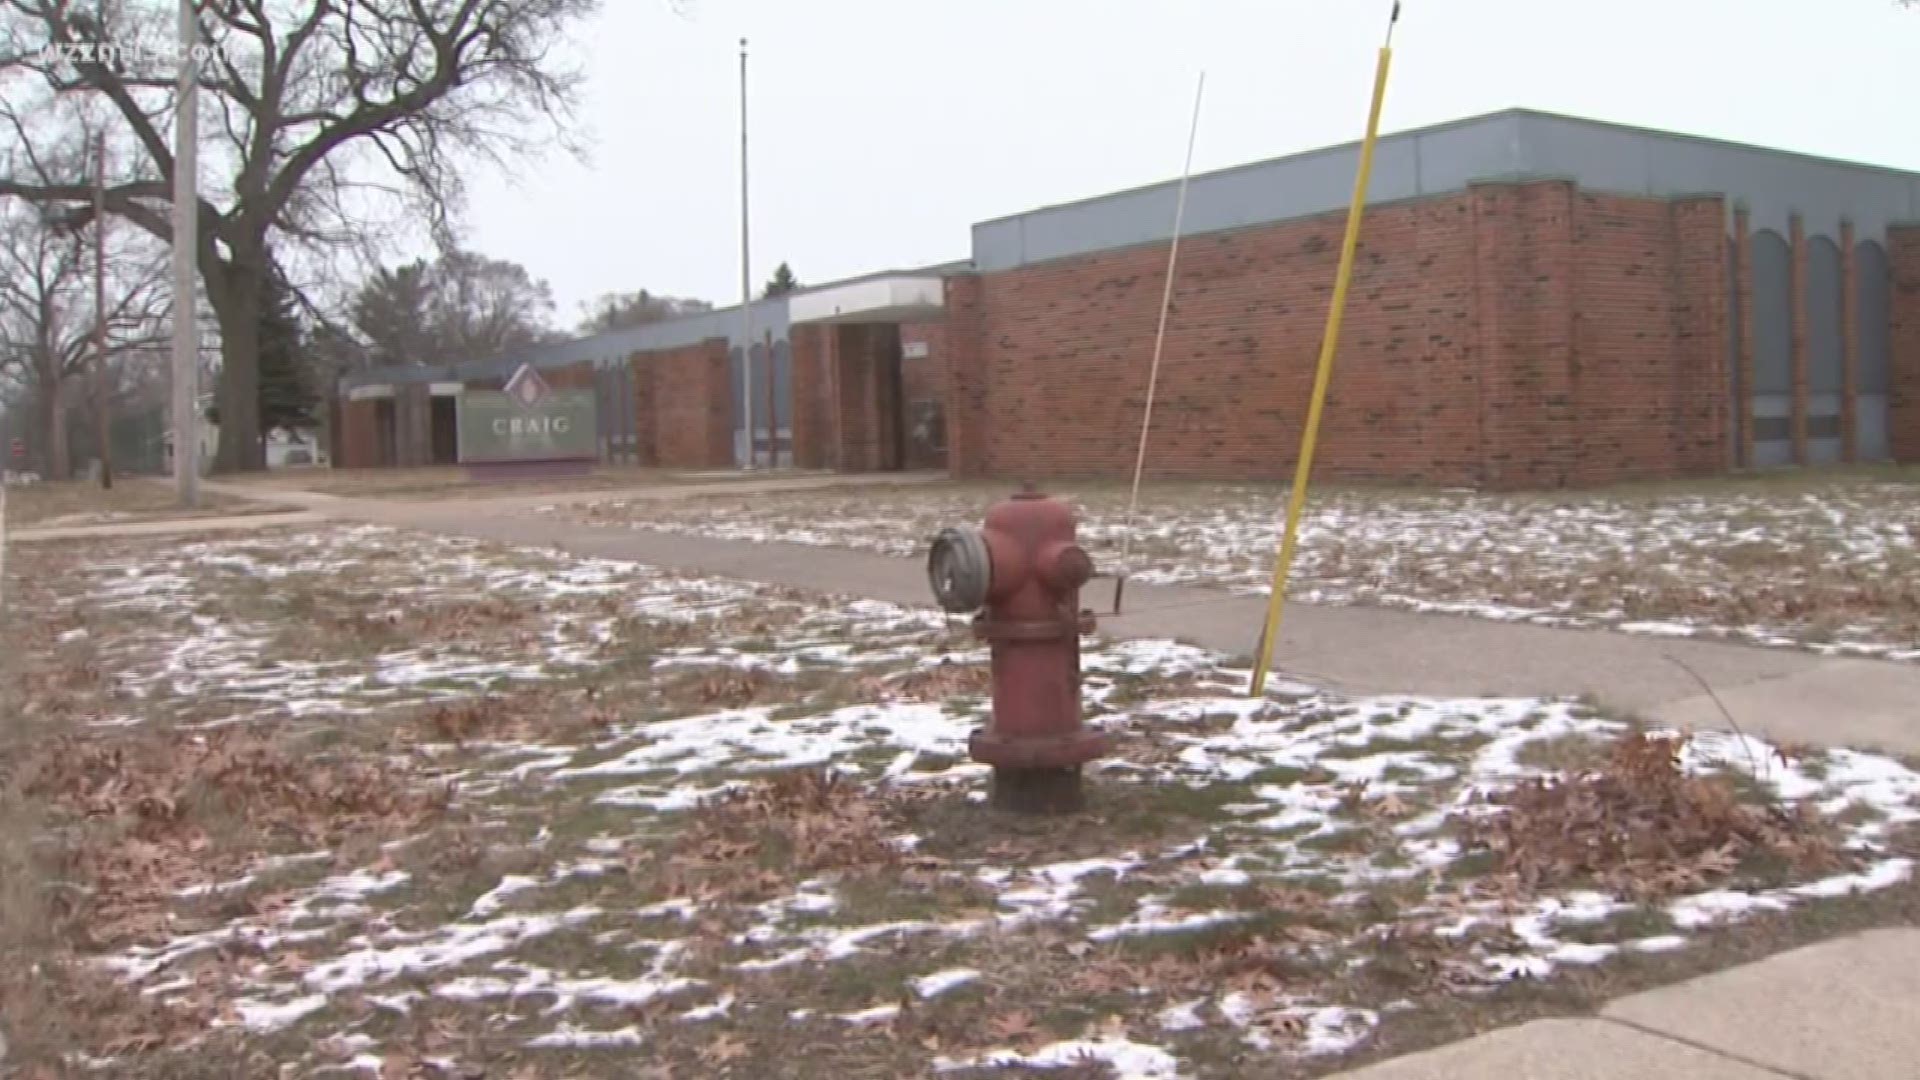 Muskegon Public Schools is finalizing a plan to sell the building to the Muskegon Area Intermediate School District